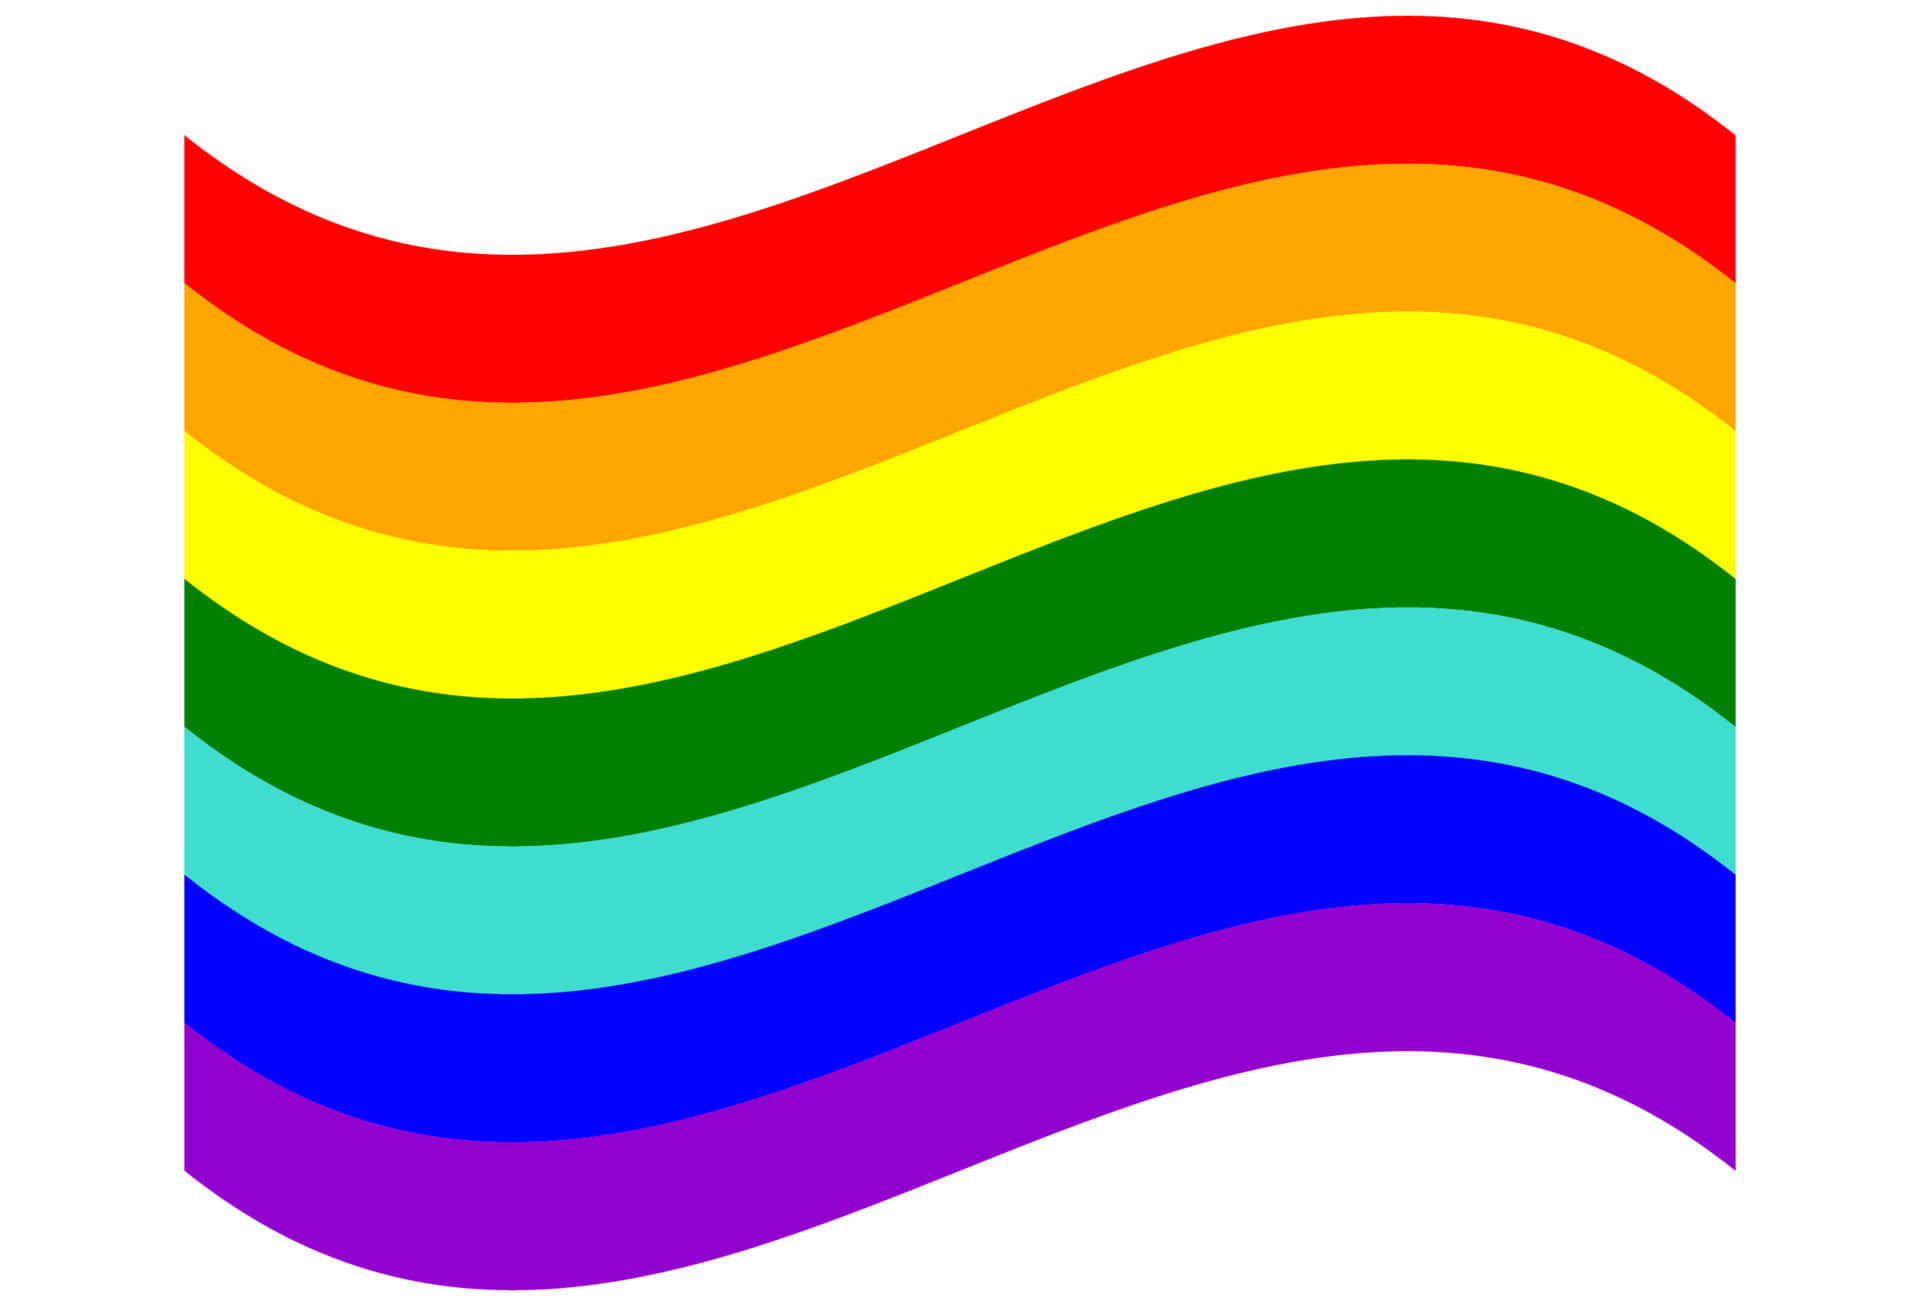 Celebrate Pride with this vibrant, colorful flag!